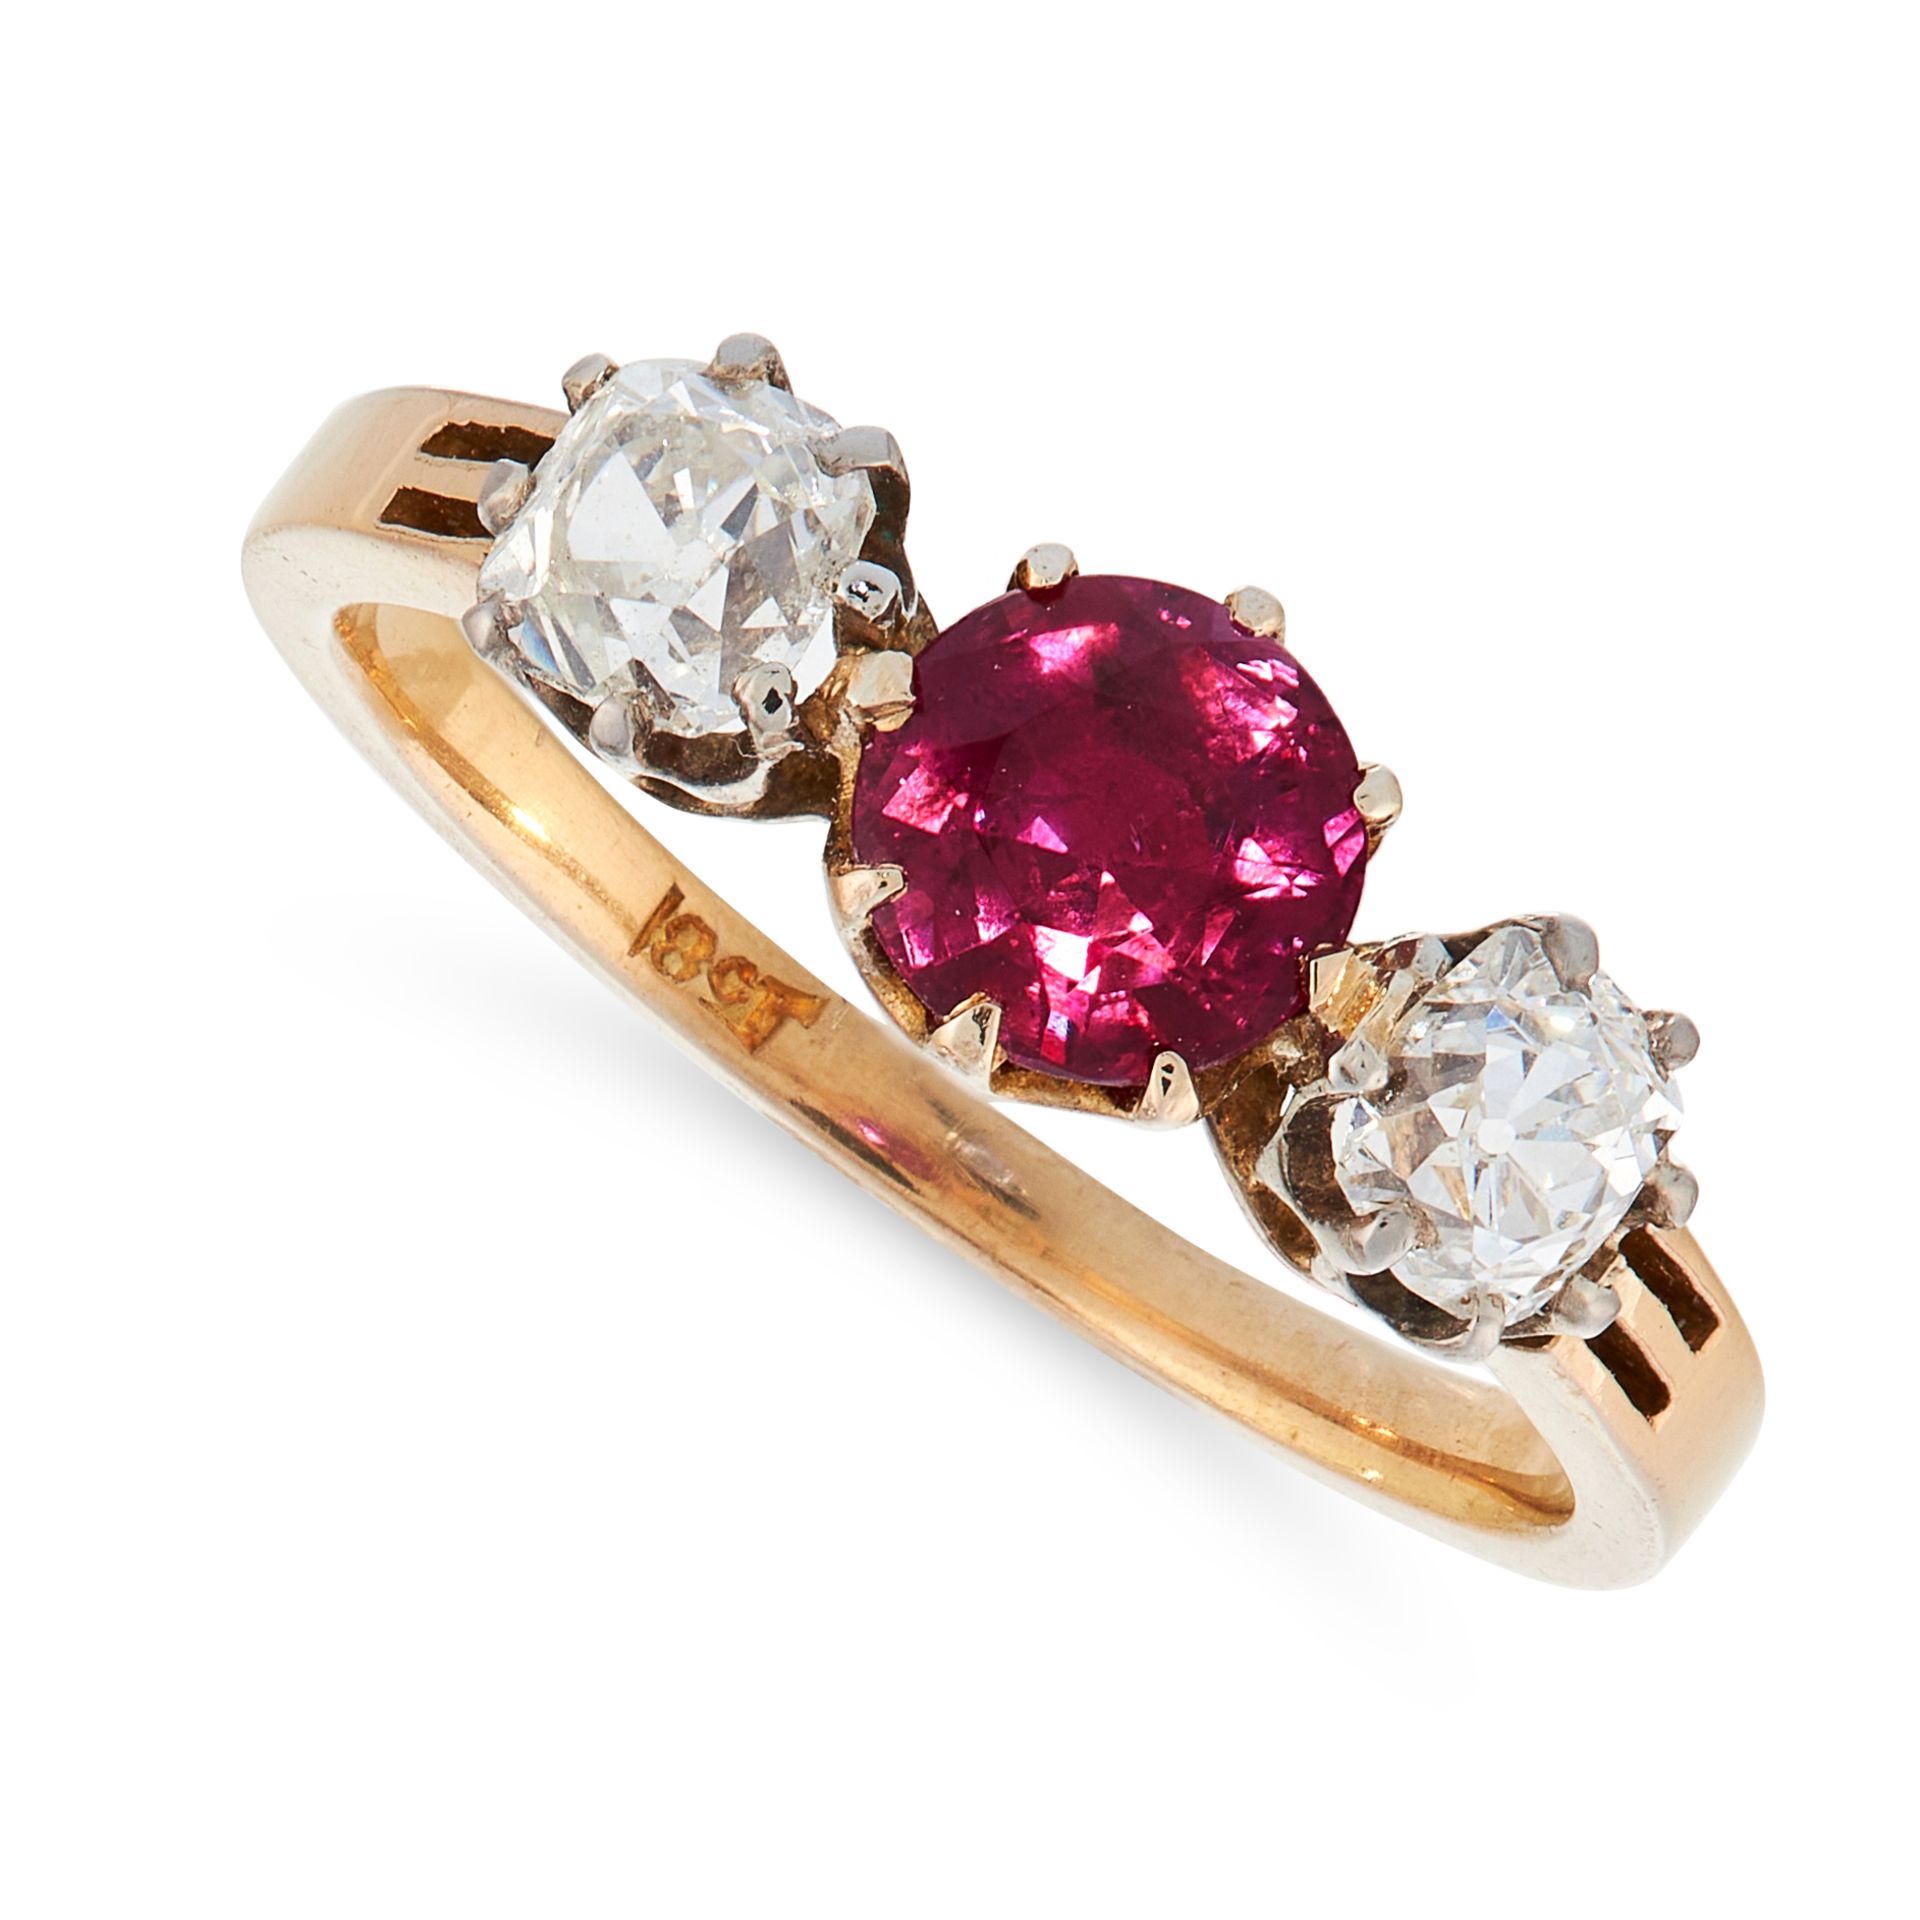 AN UNHEATED RUBY AND DIAMOND DRESS RING in 18ct yellow gold, set with a central cushion cut ruby